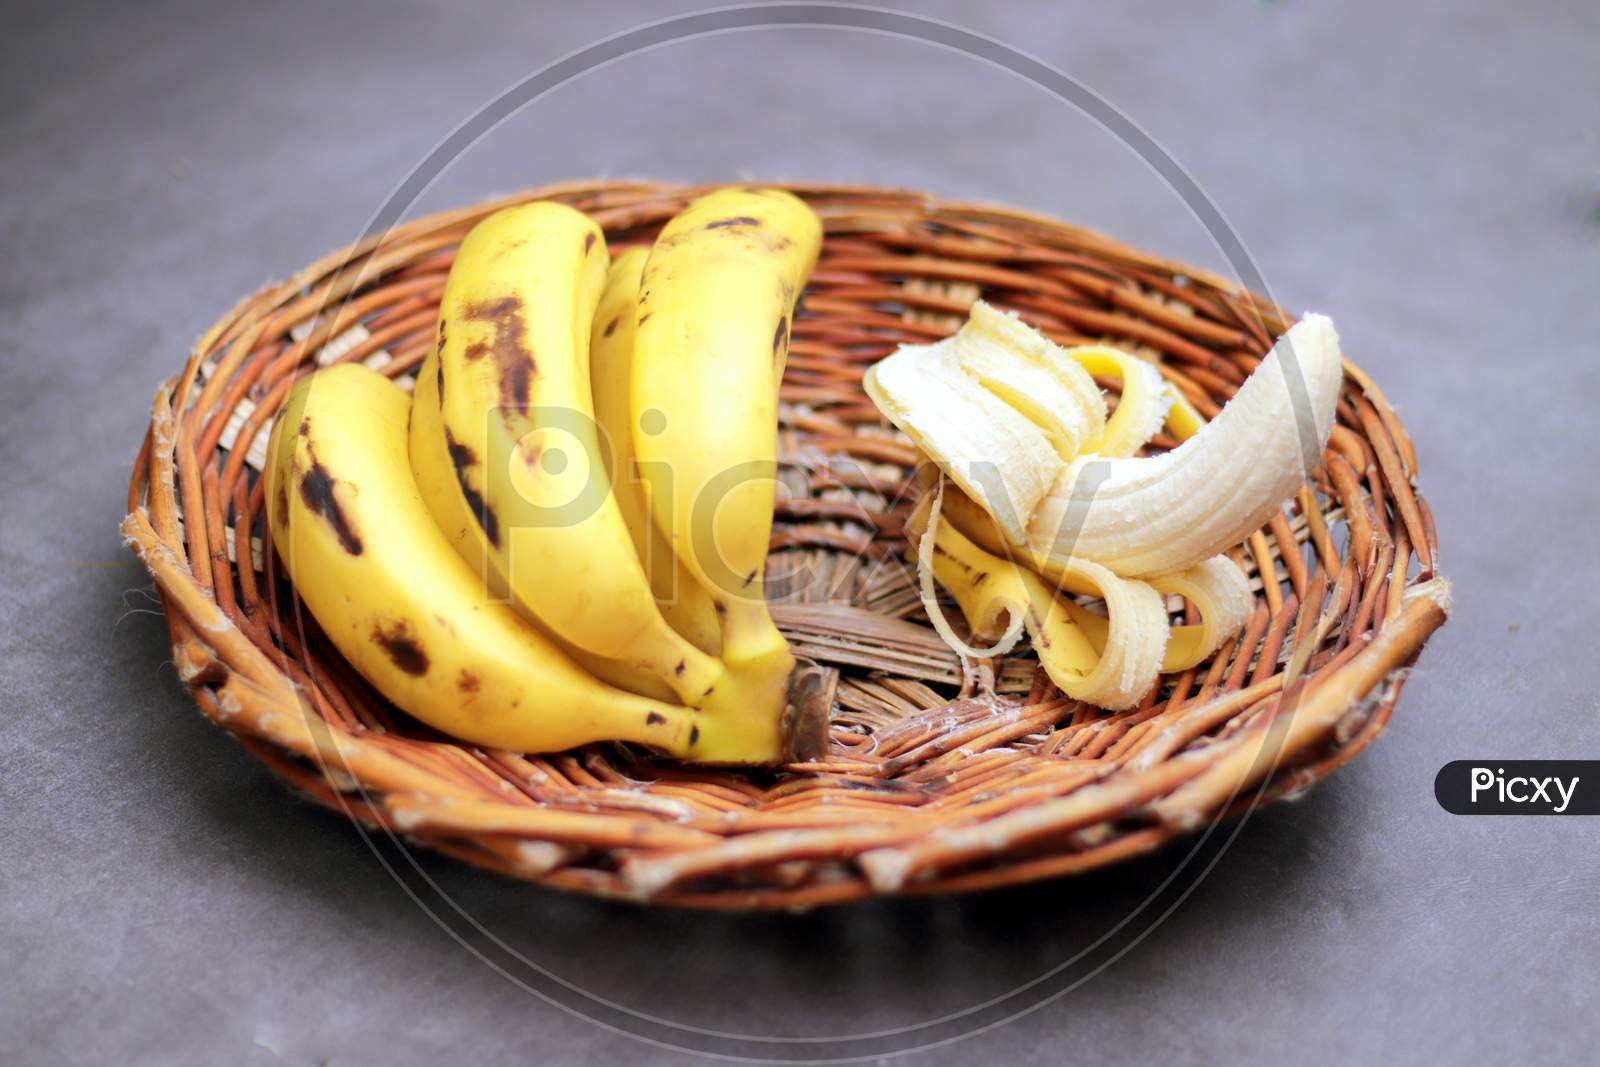 Bunch of bananas in a wooden basket, one unpeeled banana.